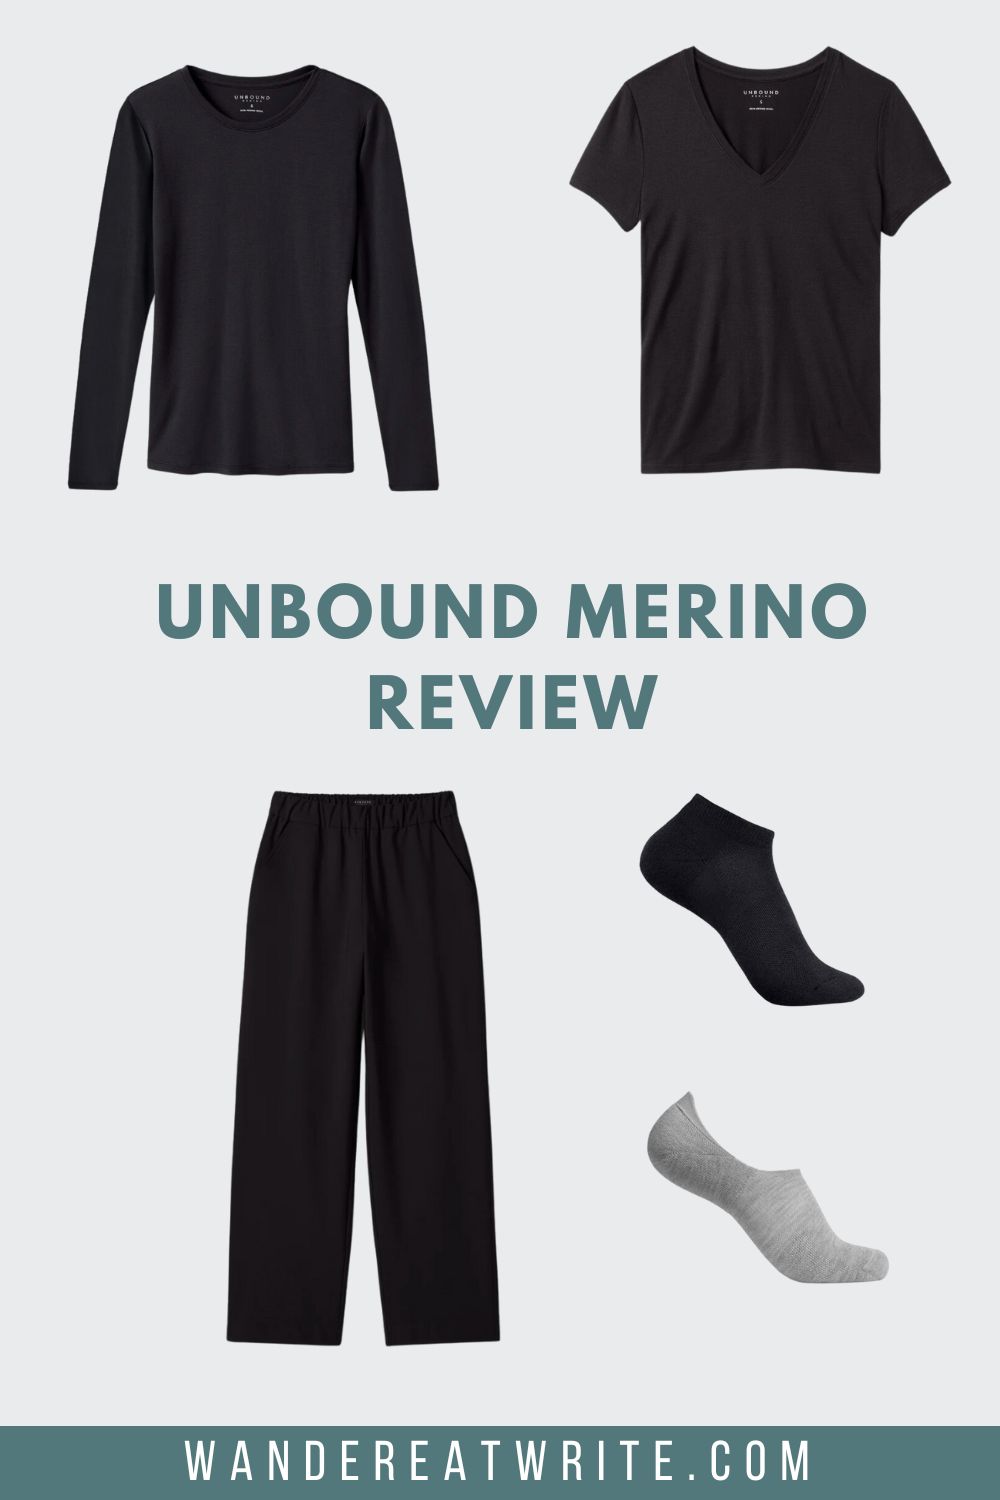 Photo collage title: Unbound Merino Review. Photos on top row: a black women's long sleeve crew shirt in black and a black women's v-neck t-shirt. Photos on the bottom row: women's lightweight travel pants in black, ankle socks in black, and no-show socks in gray